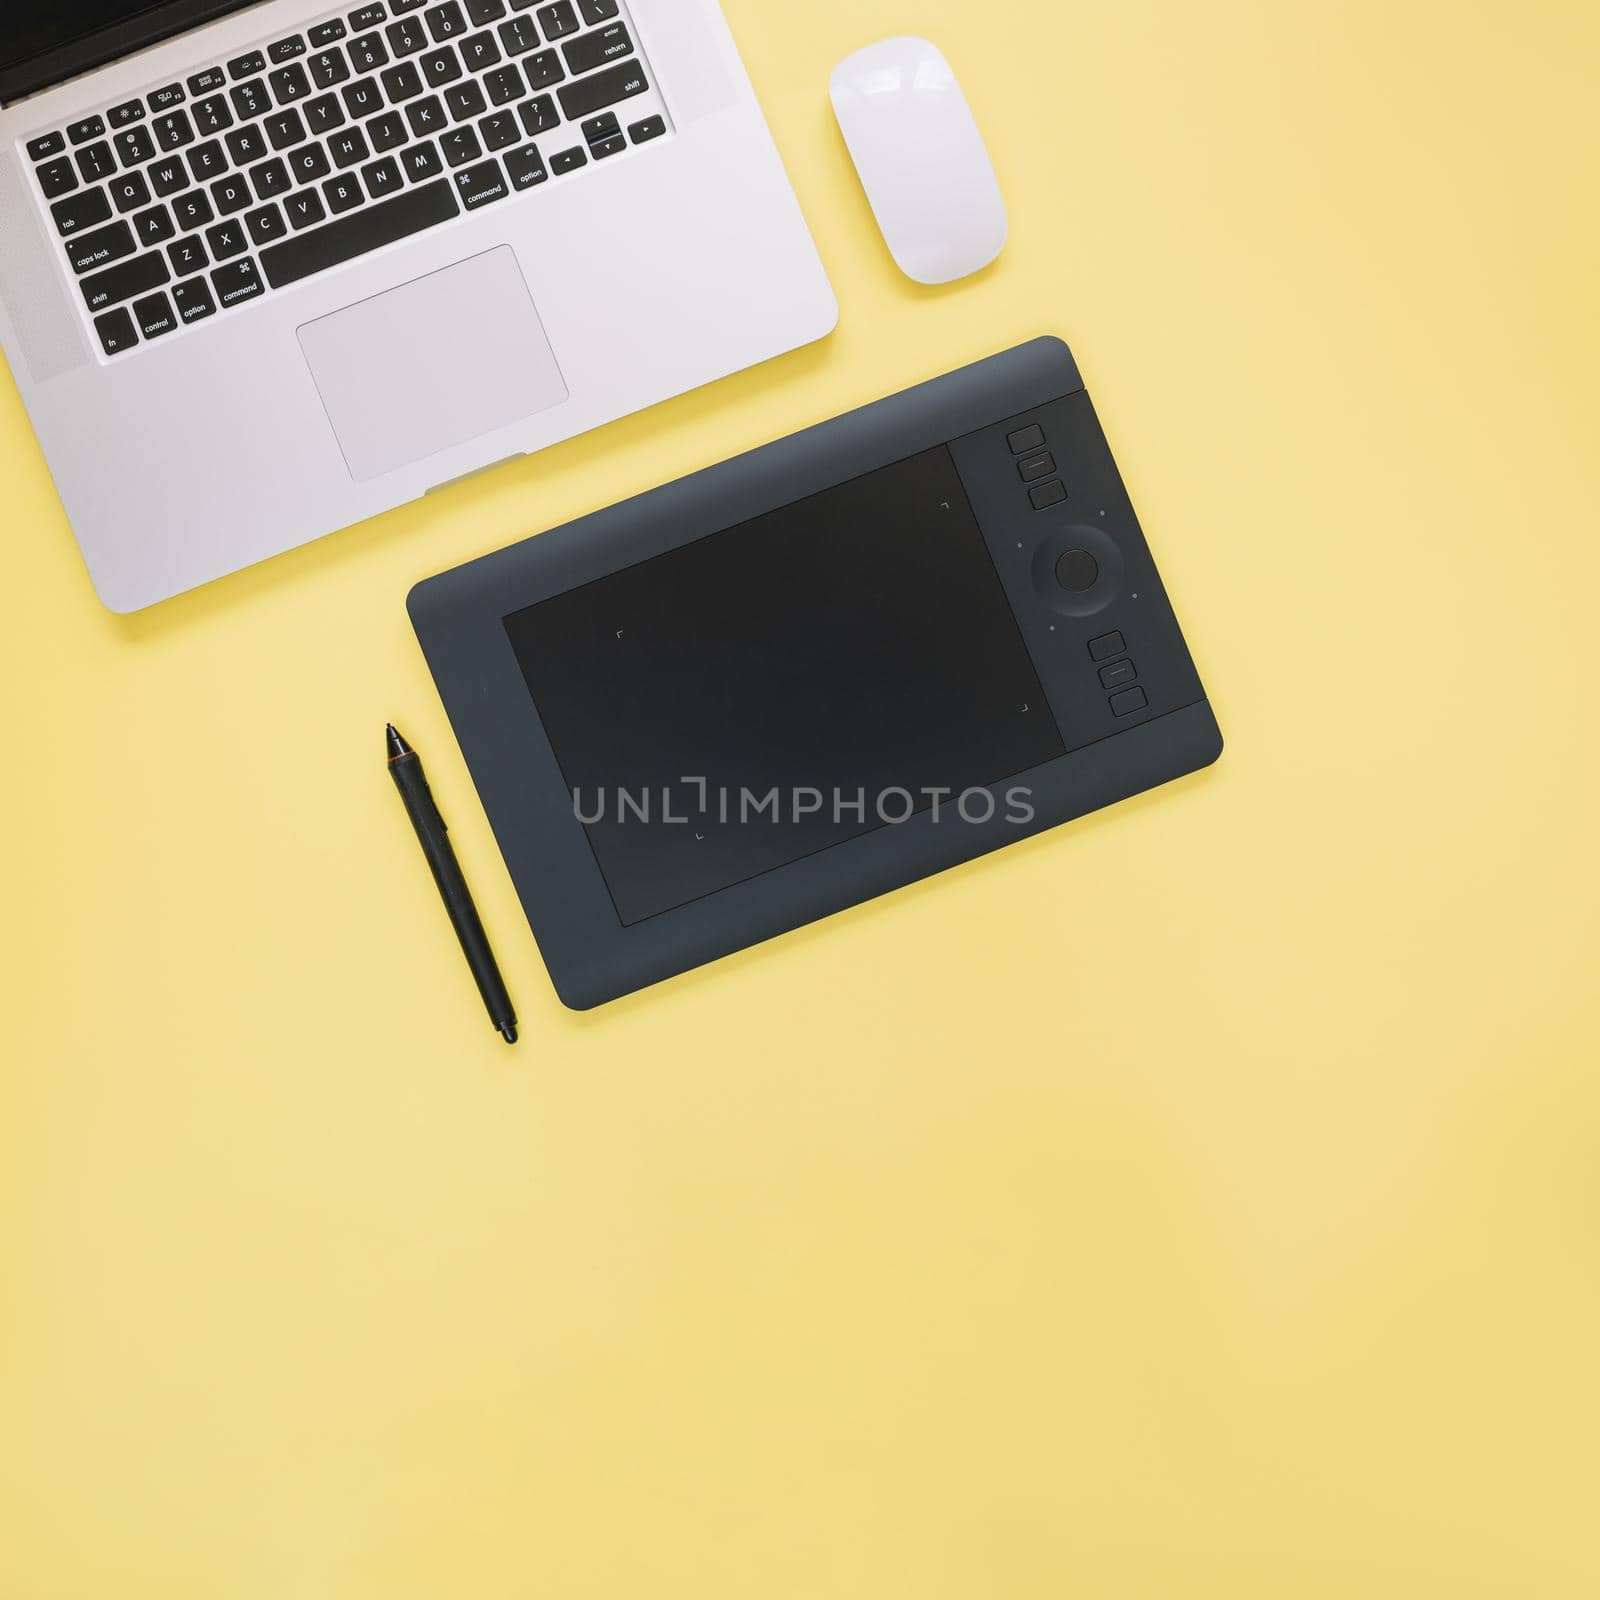 elevated view graphic digital tablet laptop yellow background